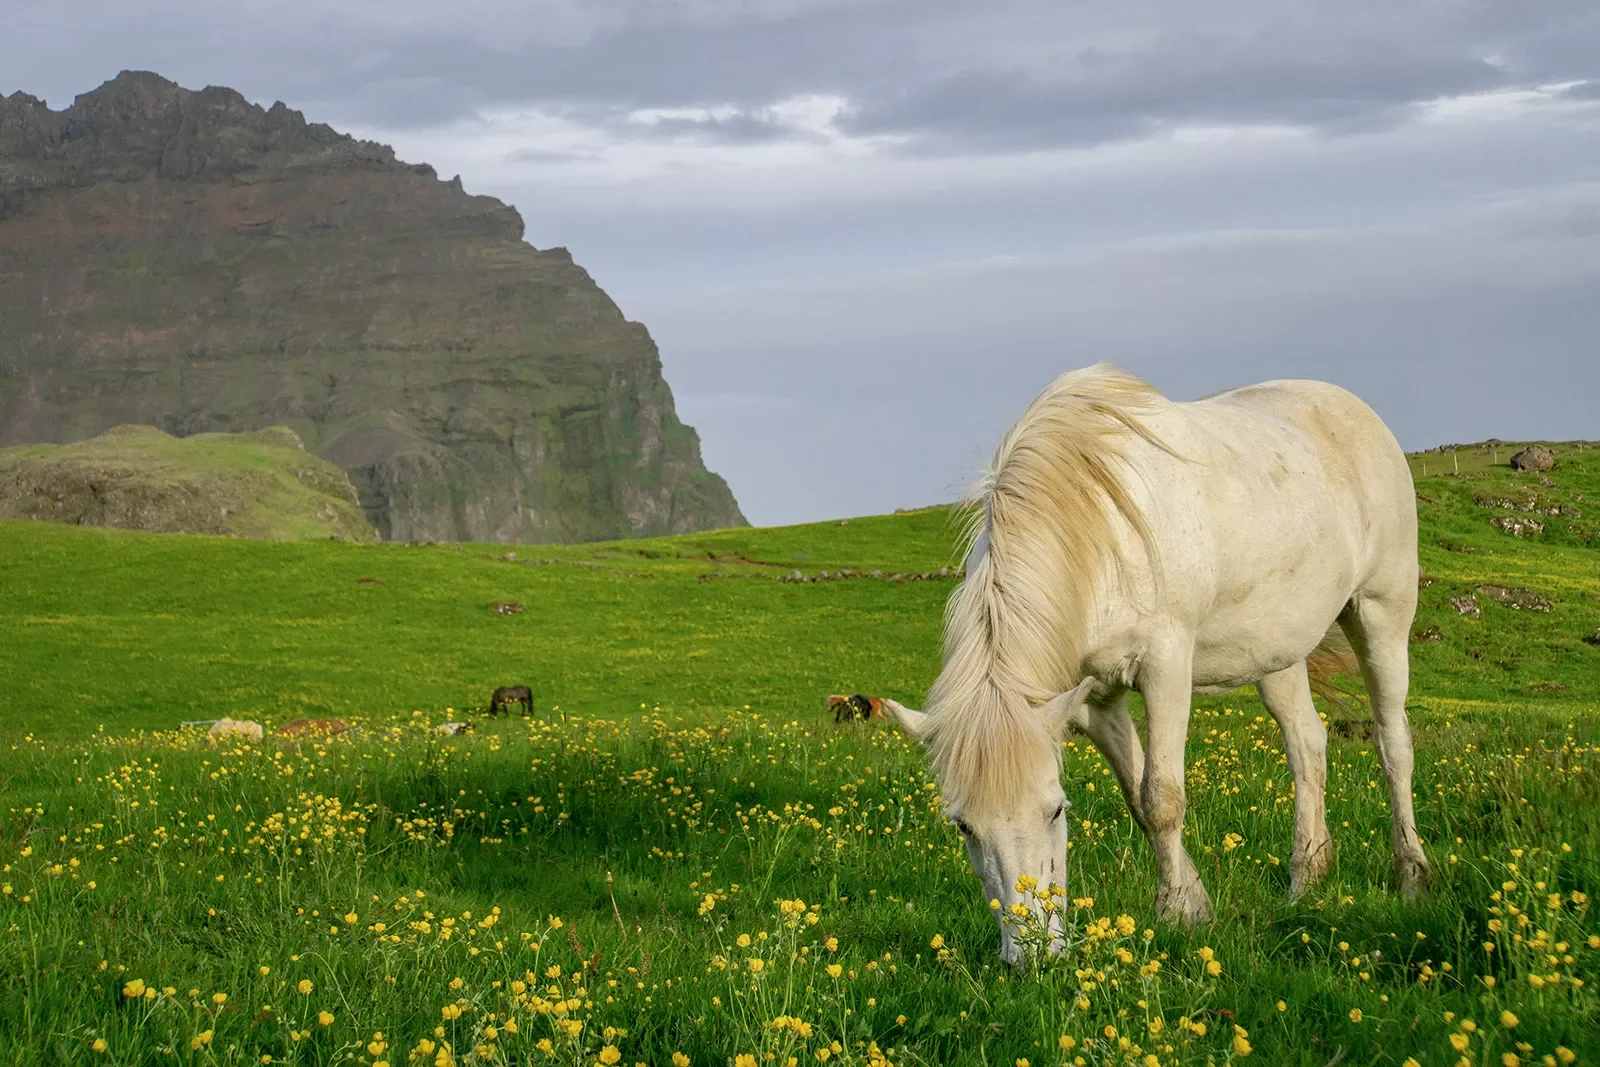 Shot of green, open meadow, white horse, large cliffs visible.